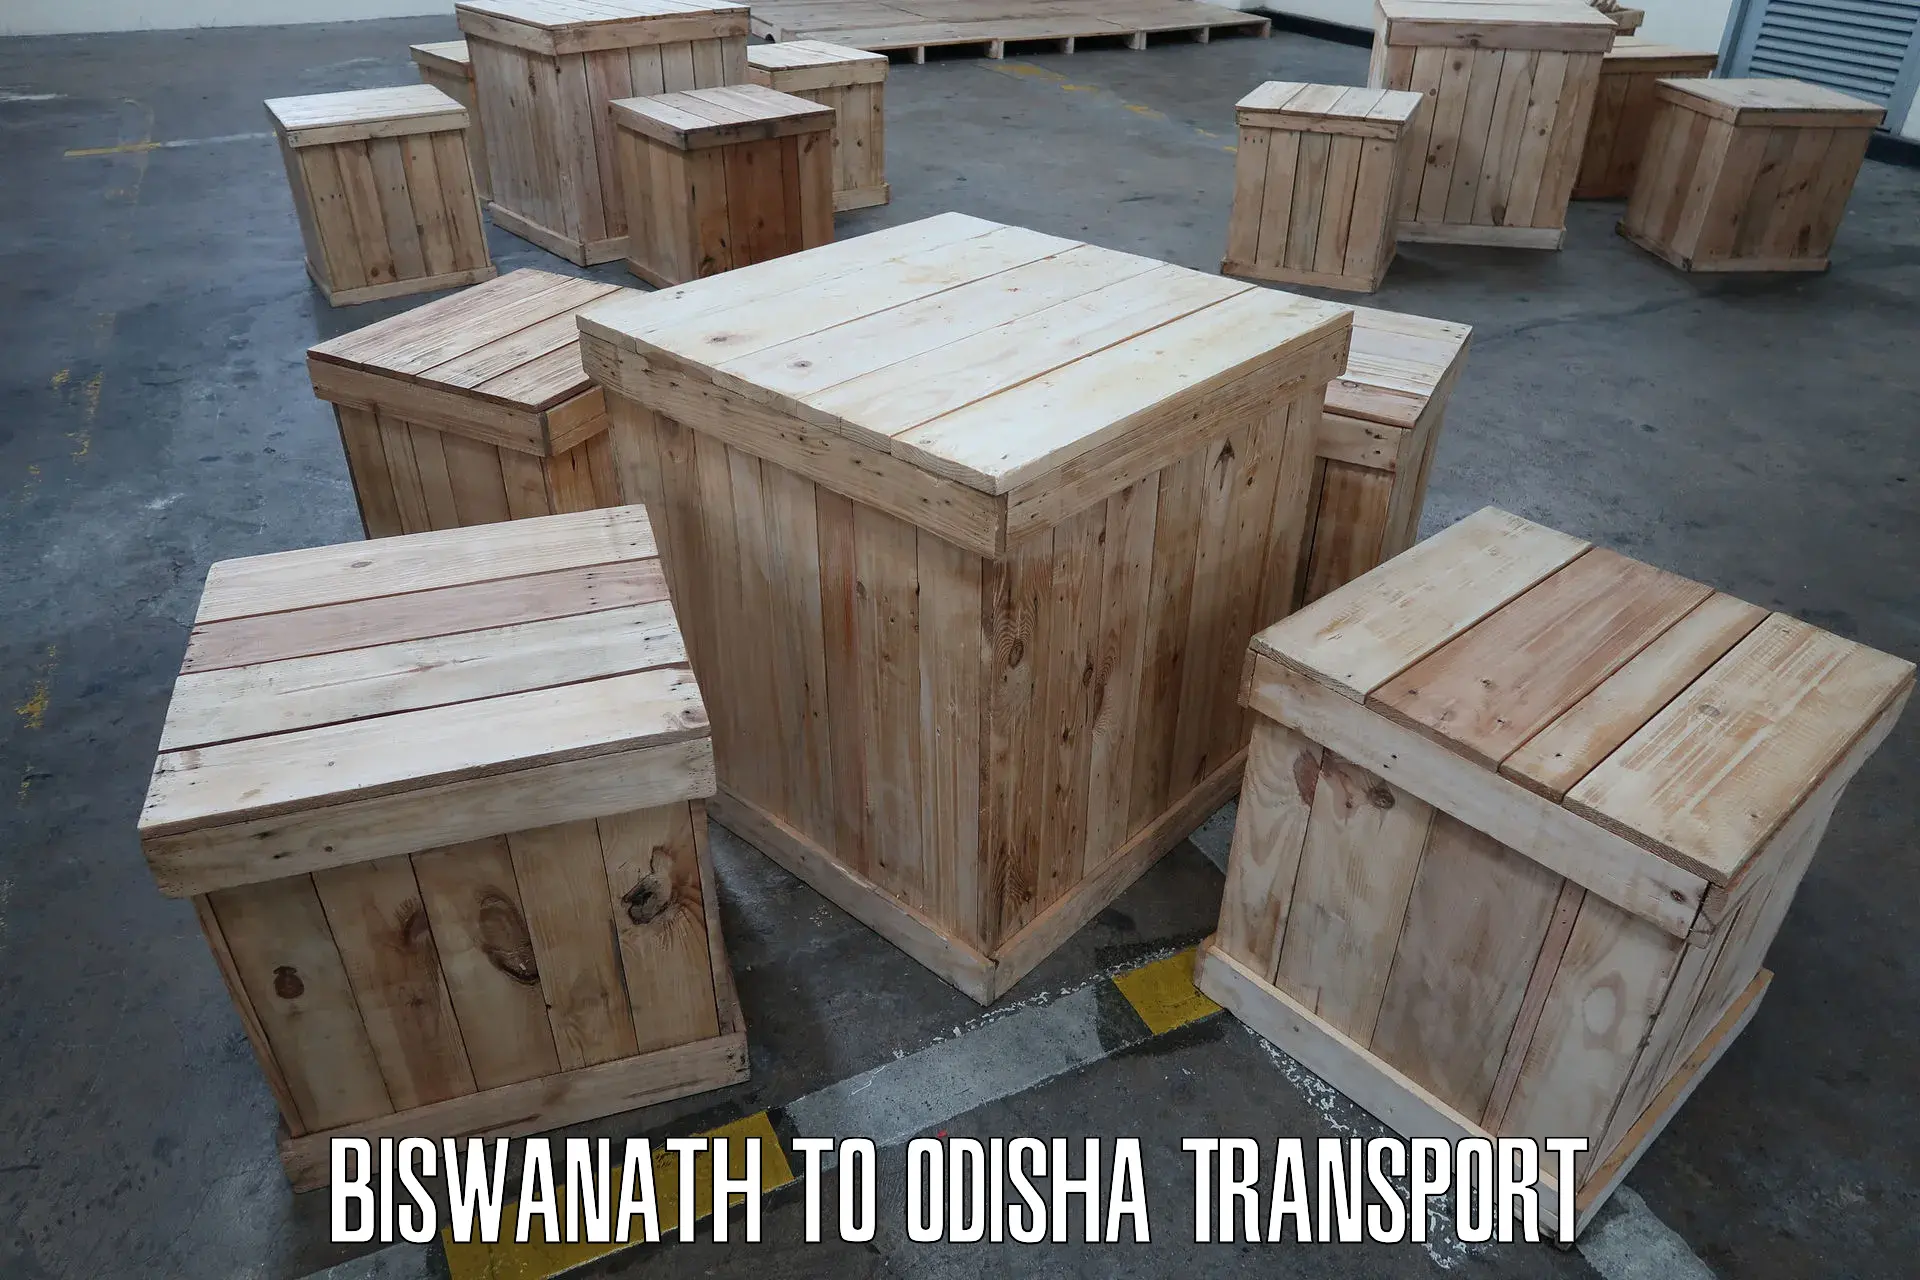 Daily transport service in Biswanath to Joda